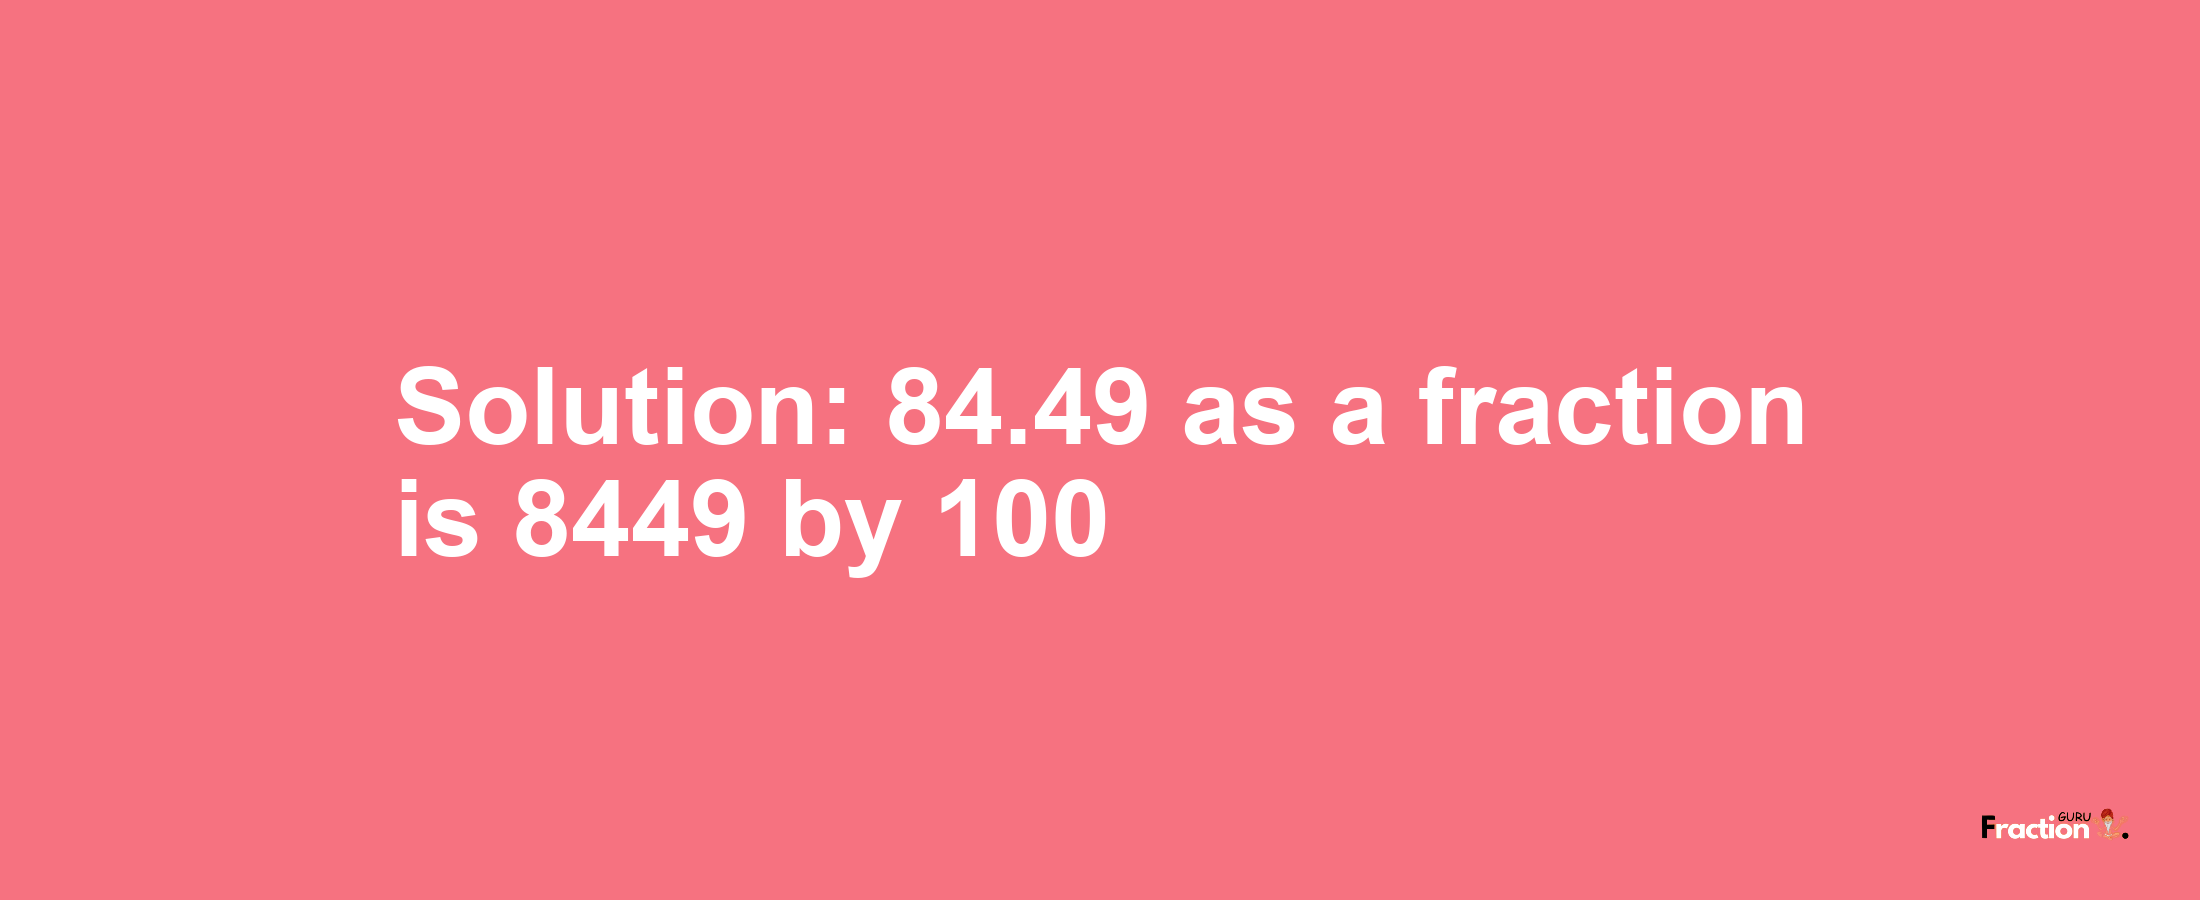 Solution:84.49 as a fraction is 8449/100